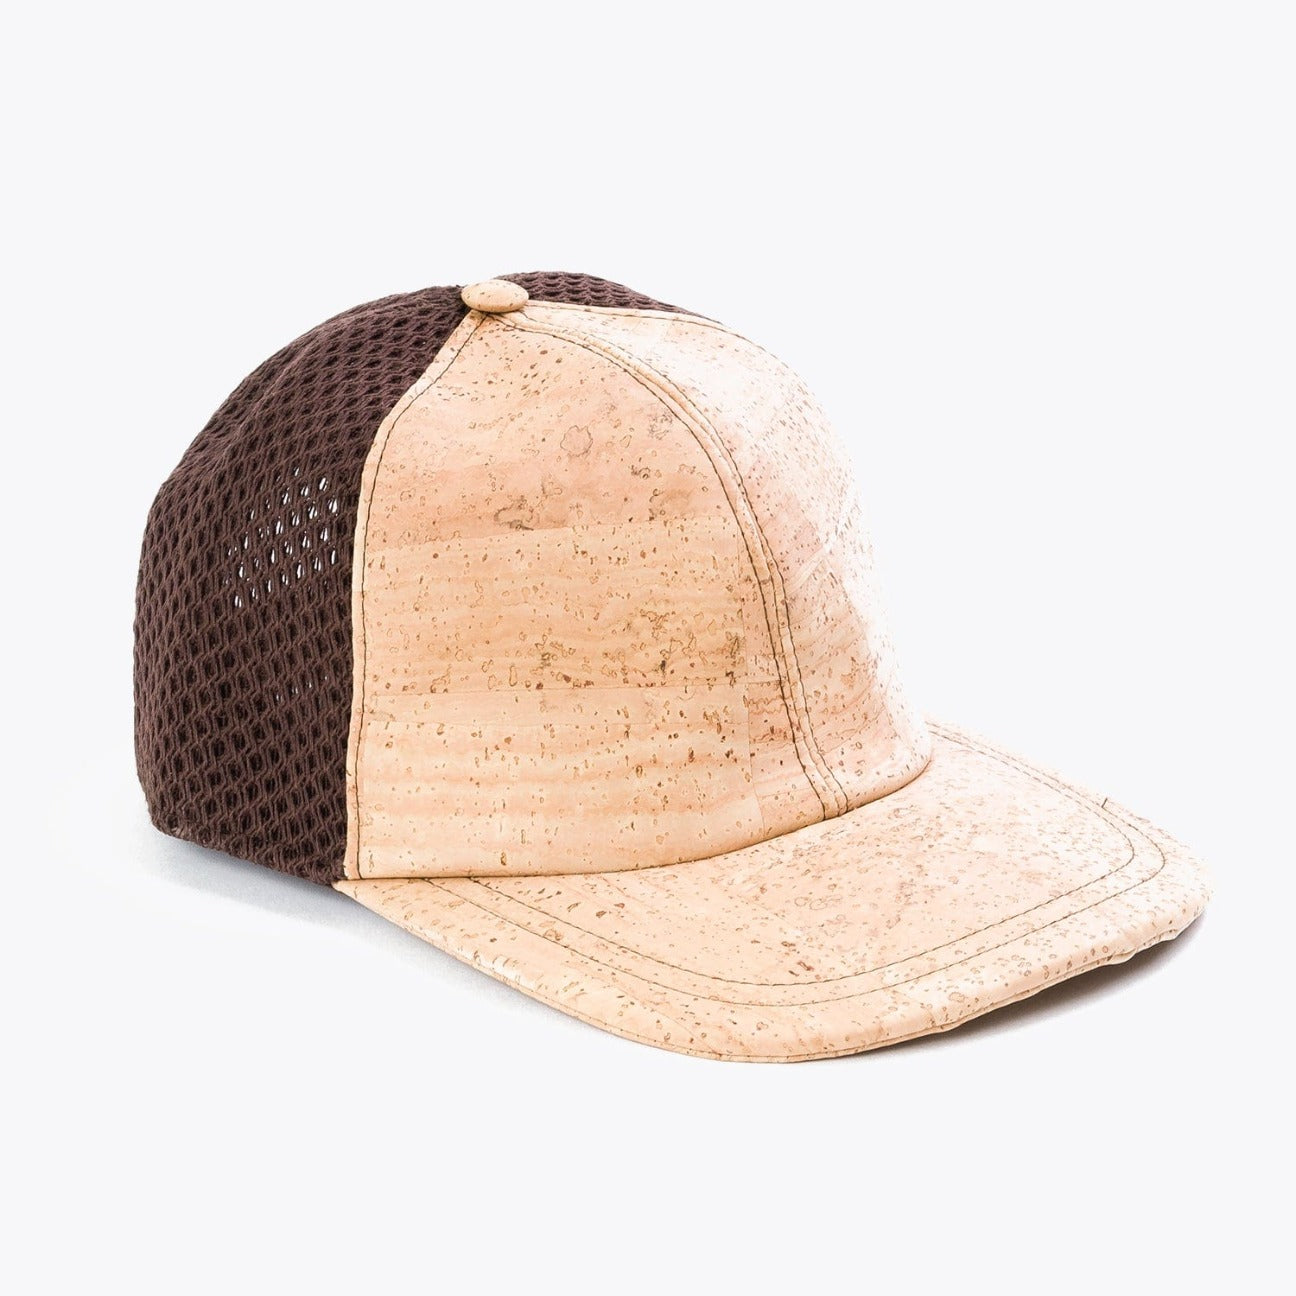 Cork Trucker Cap with a natural cork fabric brim and front with a chocolate brown blue mesh black